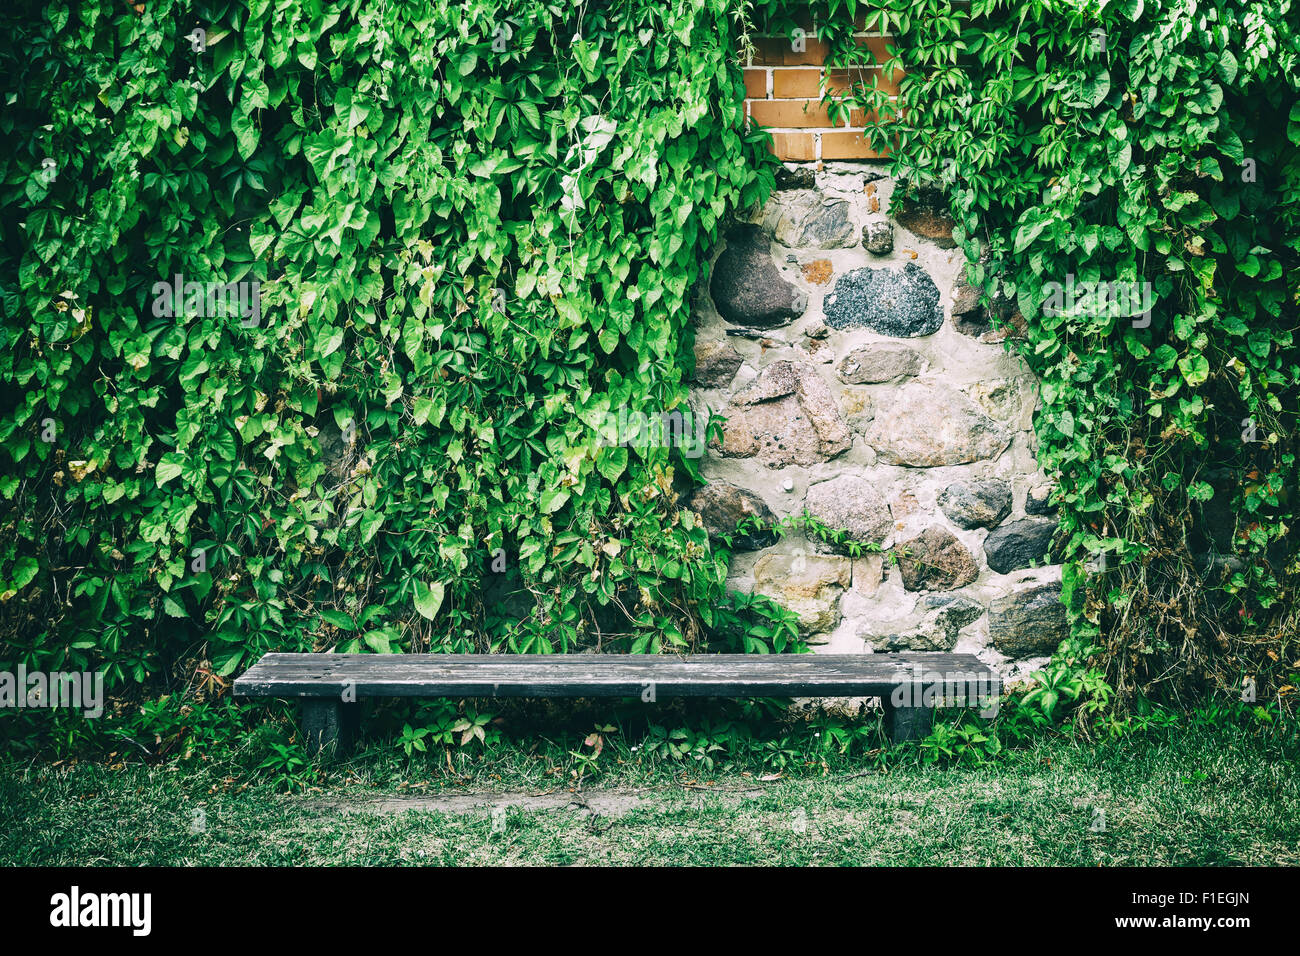 Wooden bench near old stone wall covered with ivy leaves Stock Photo